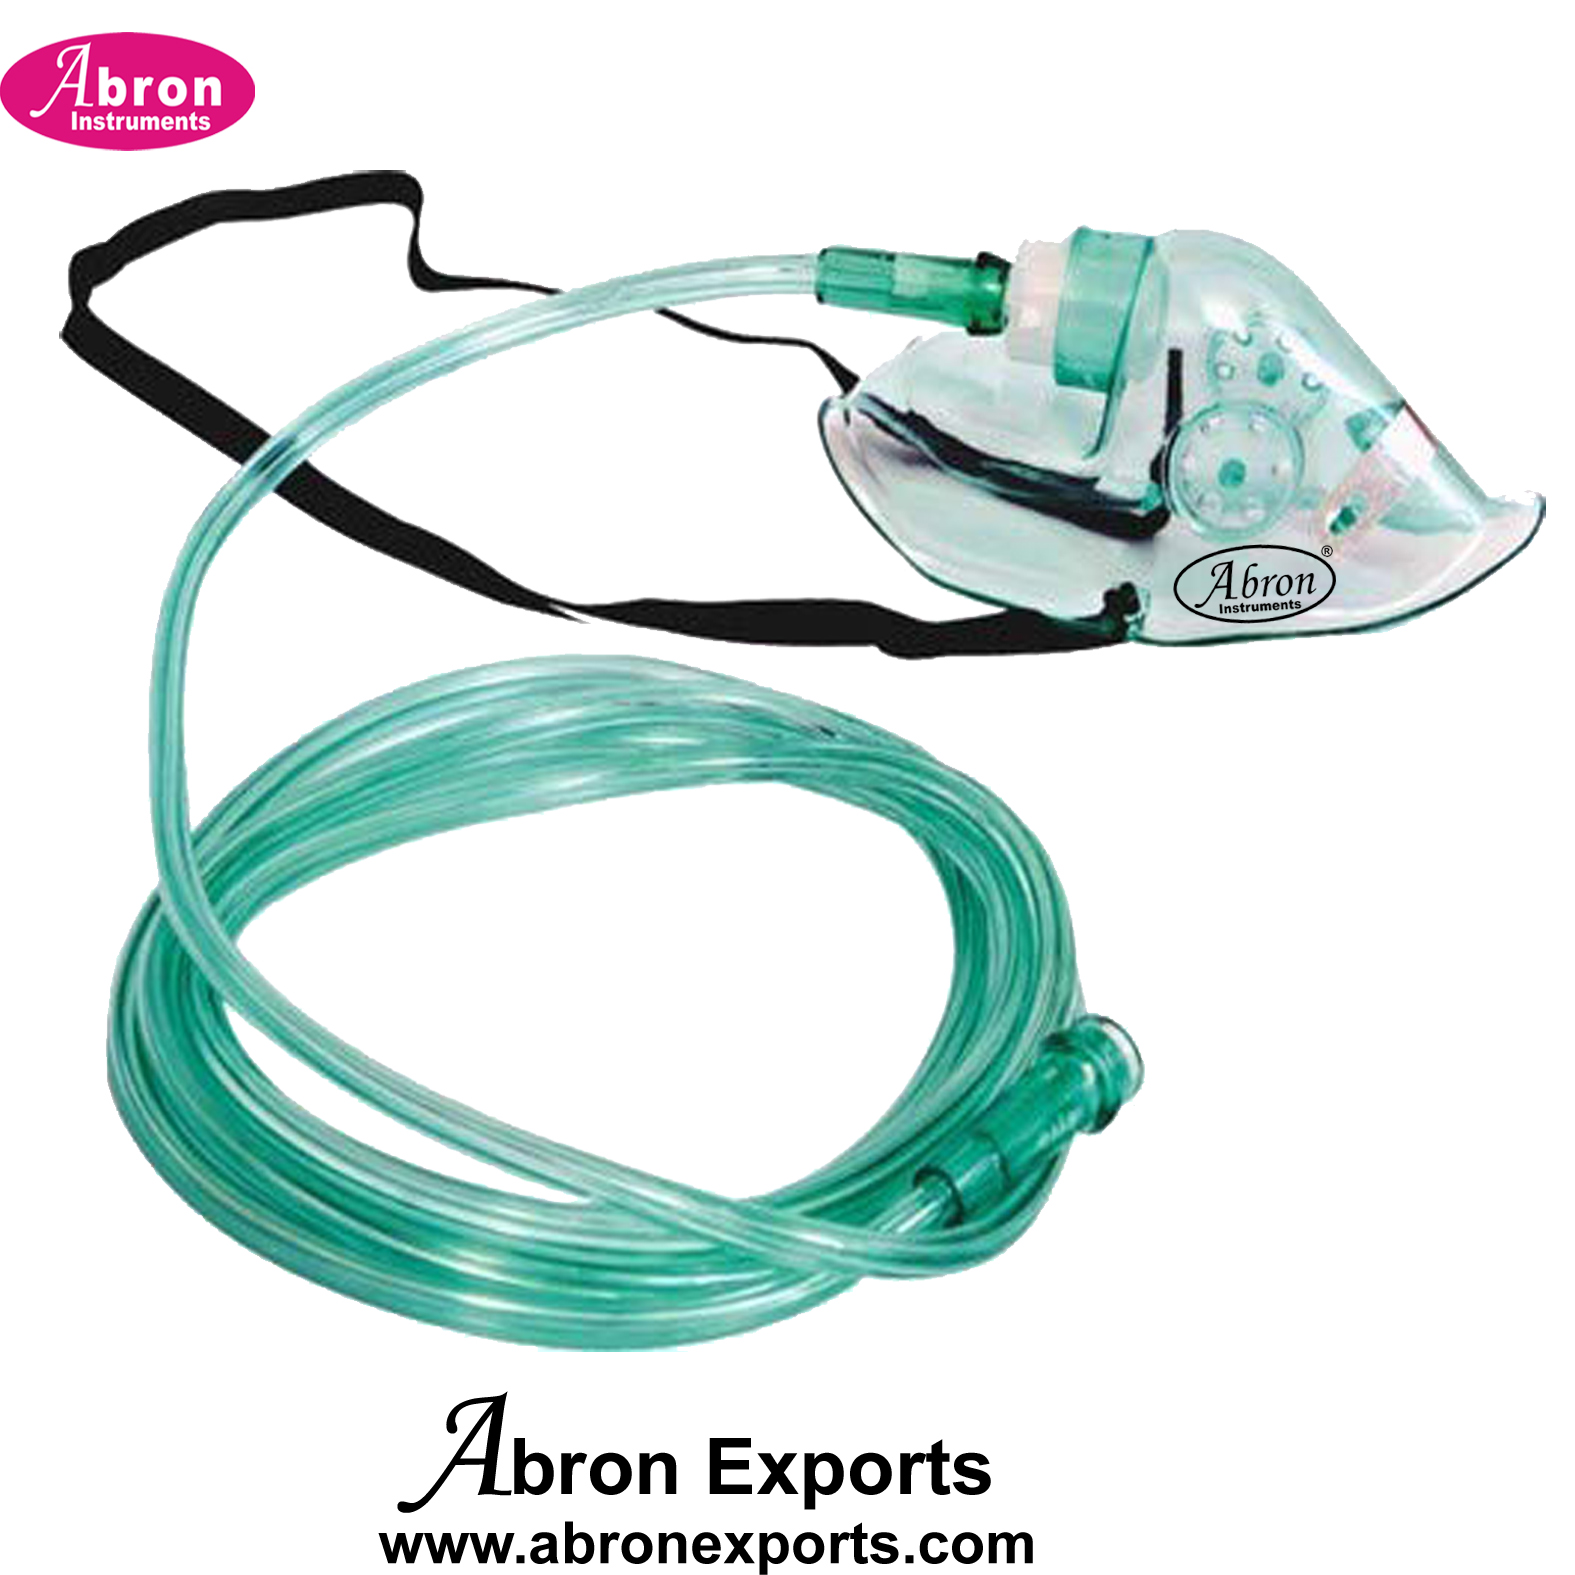 Oxygen test tube with face mask pack of 10 abron ABM-2360TB